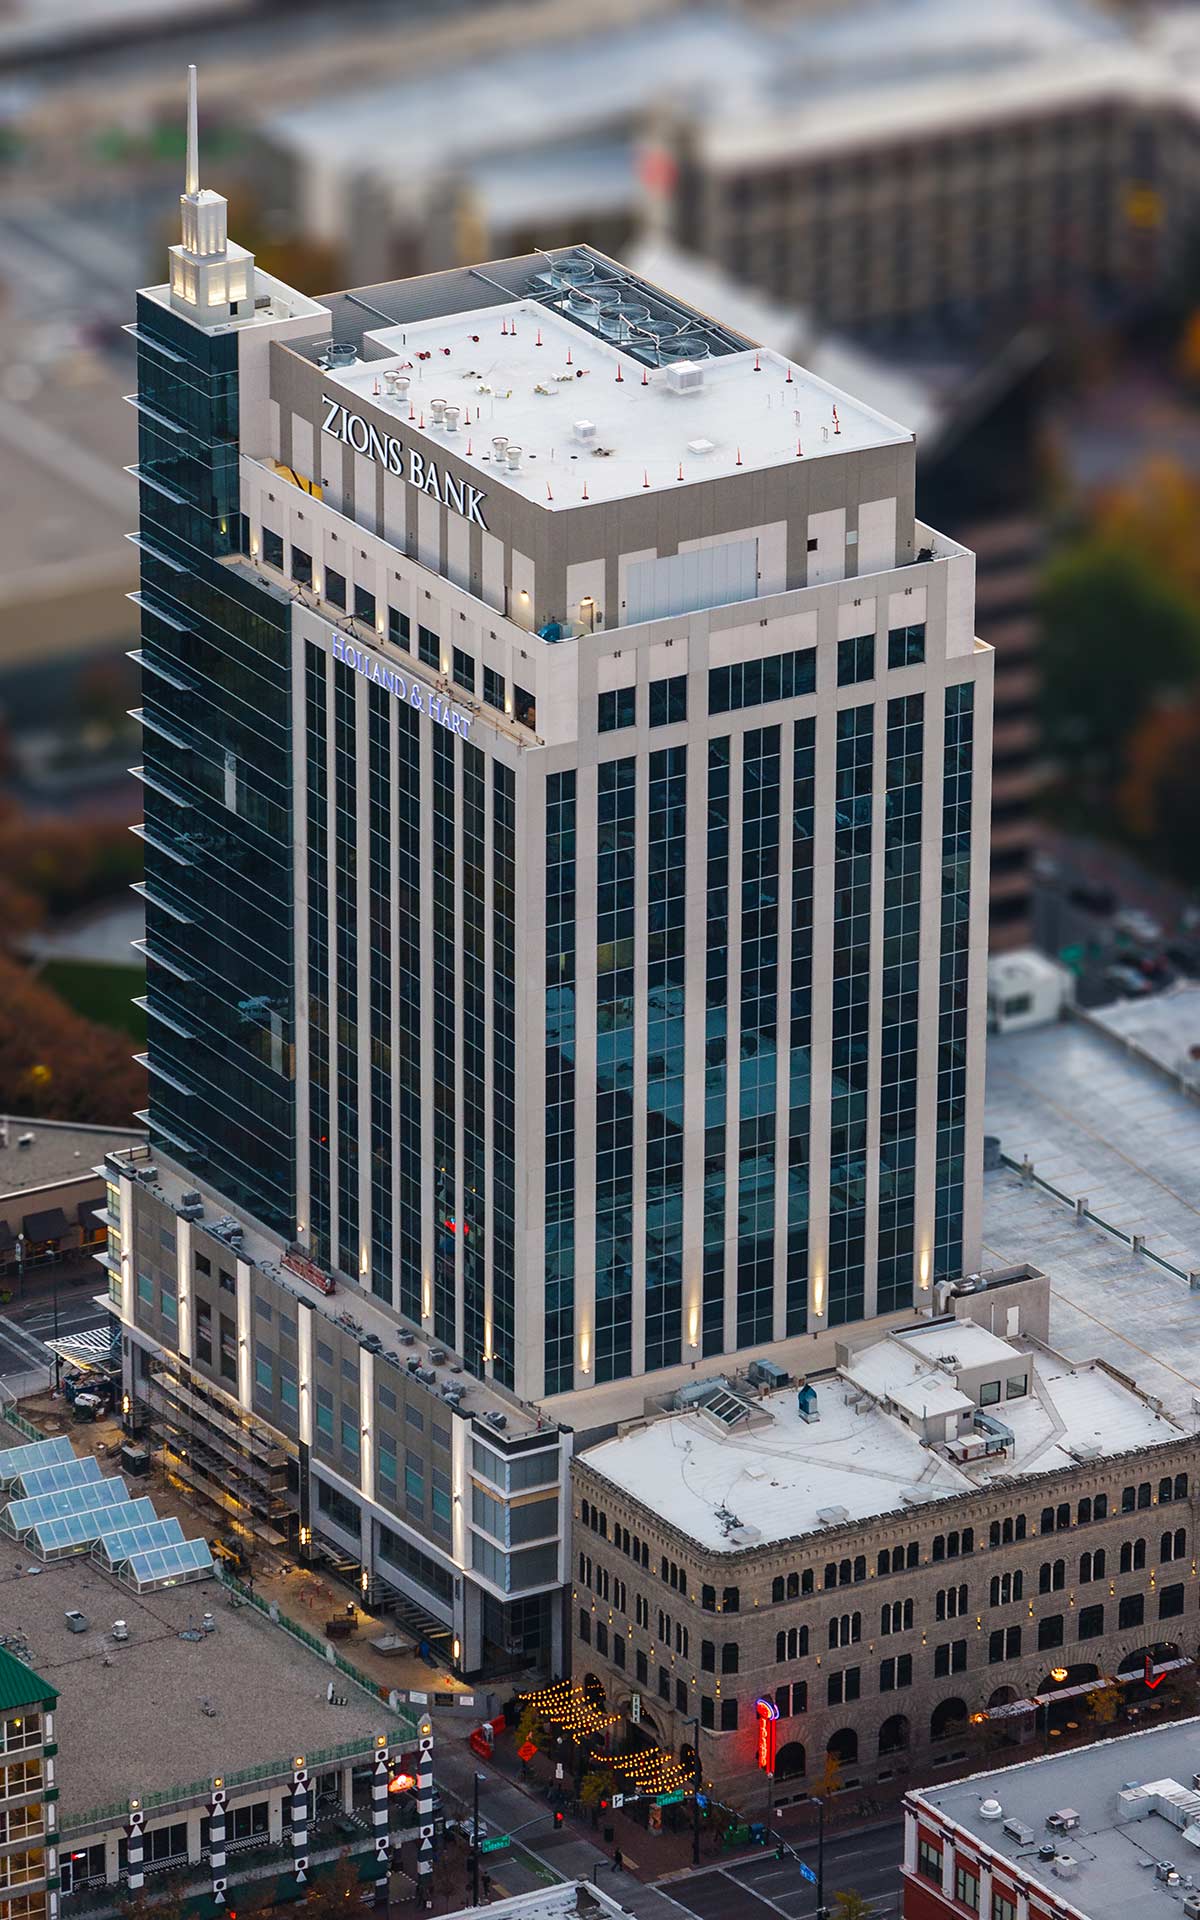 Aerial Photography-Zion's Bank (8th & Main) Building in Downtown Boise, Idaho, with Special Effects.